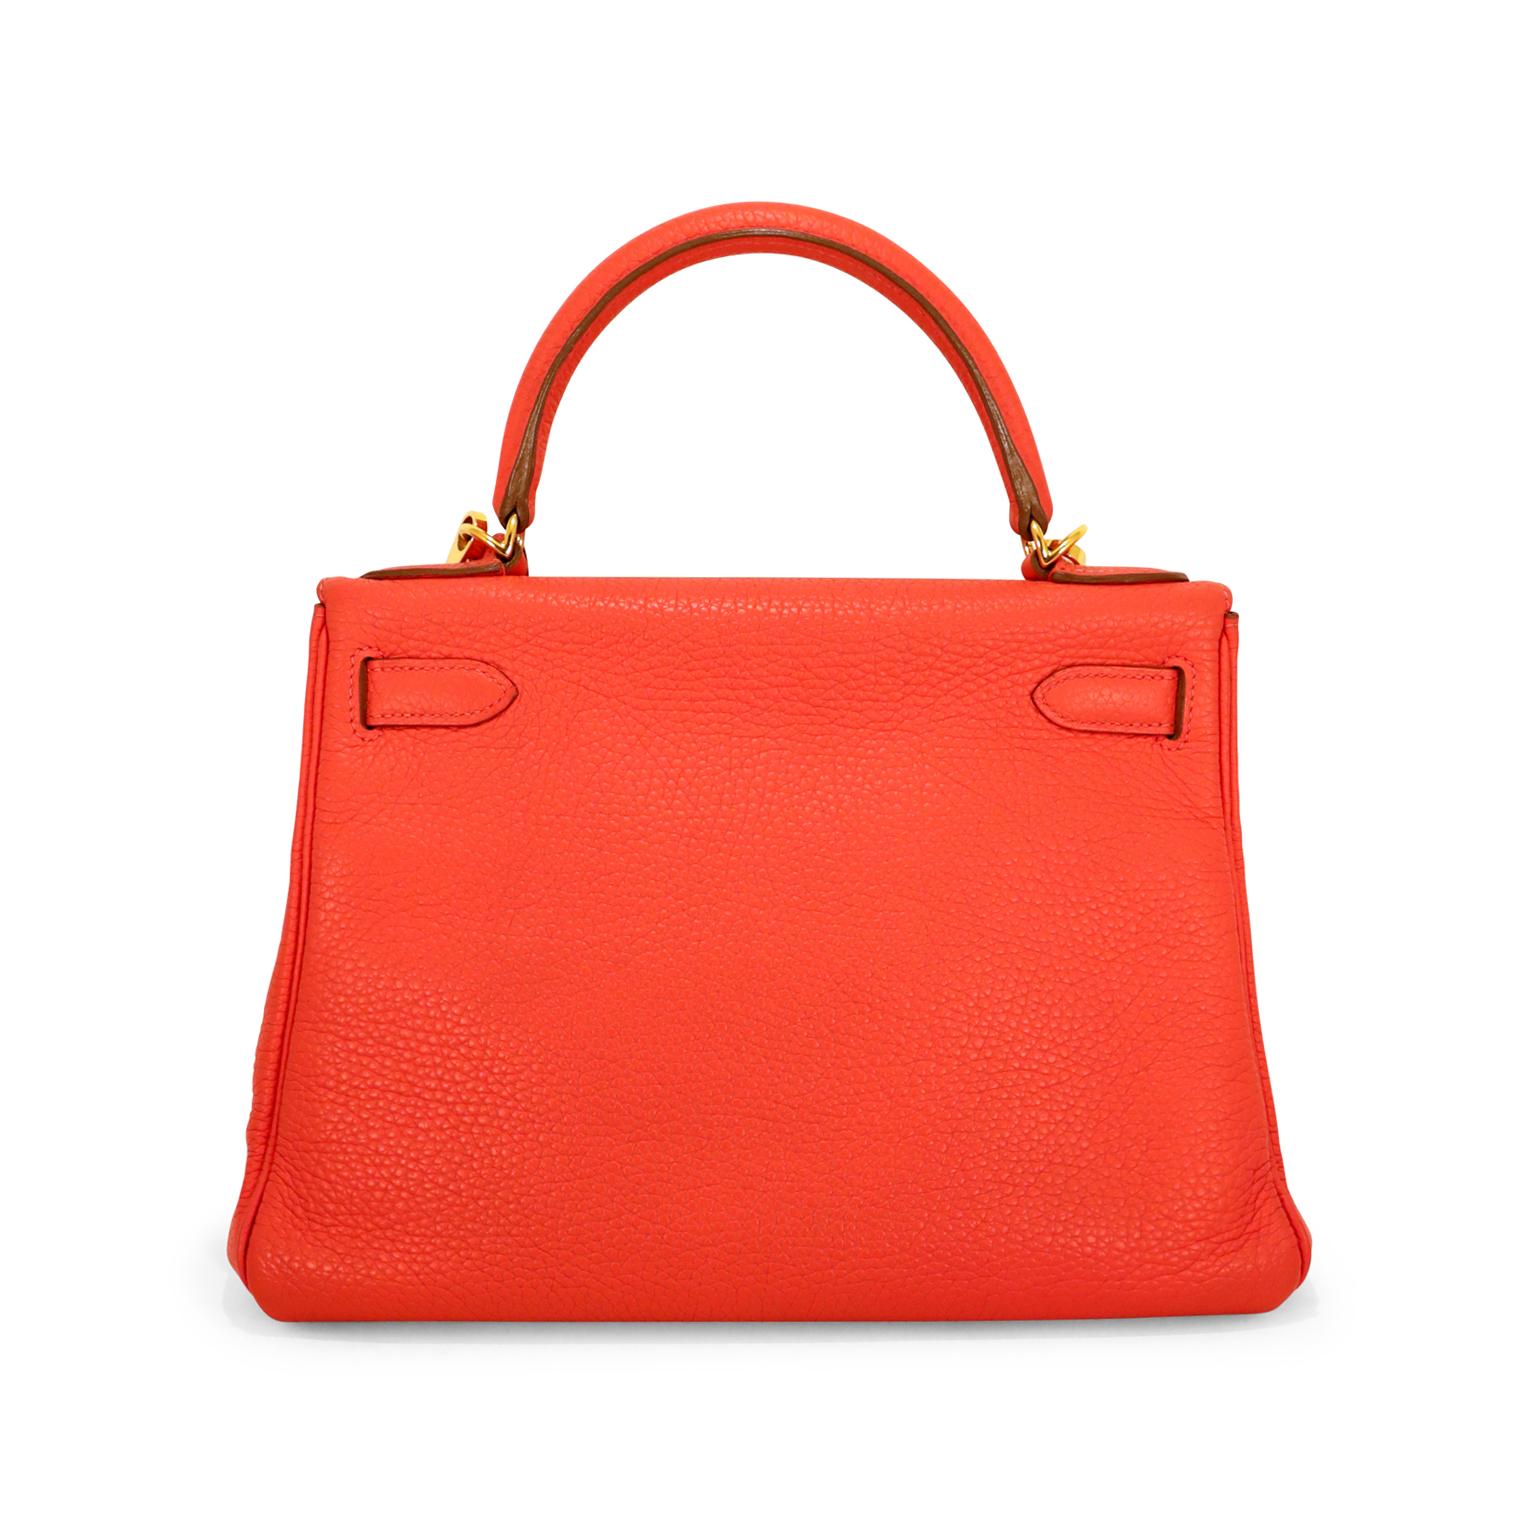 This authentic Hermès Rouge Casaque Togo Leather 28 cm Kelly Bag is in excellent condition.   Hermès bags are considered the ultimate luxury item worldwide.  Each piece is handcrafted with waitlists that can exceed a year or more.  The streamlined